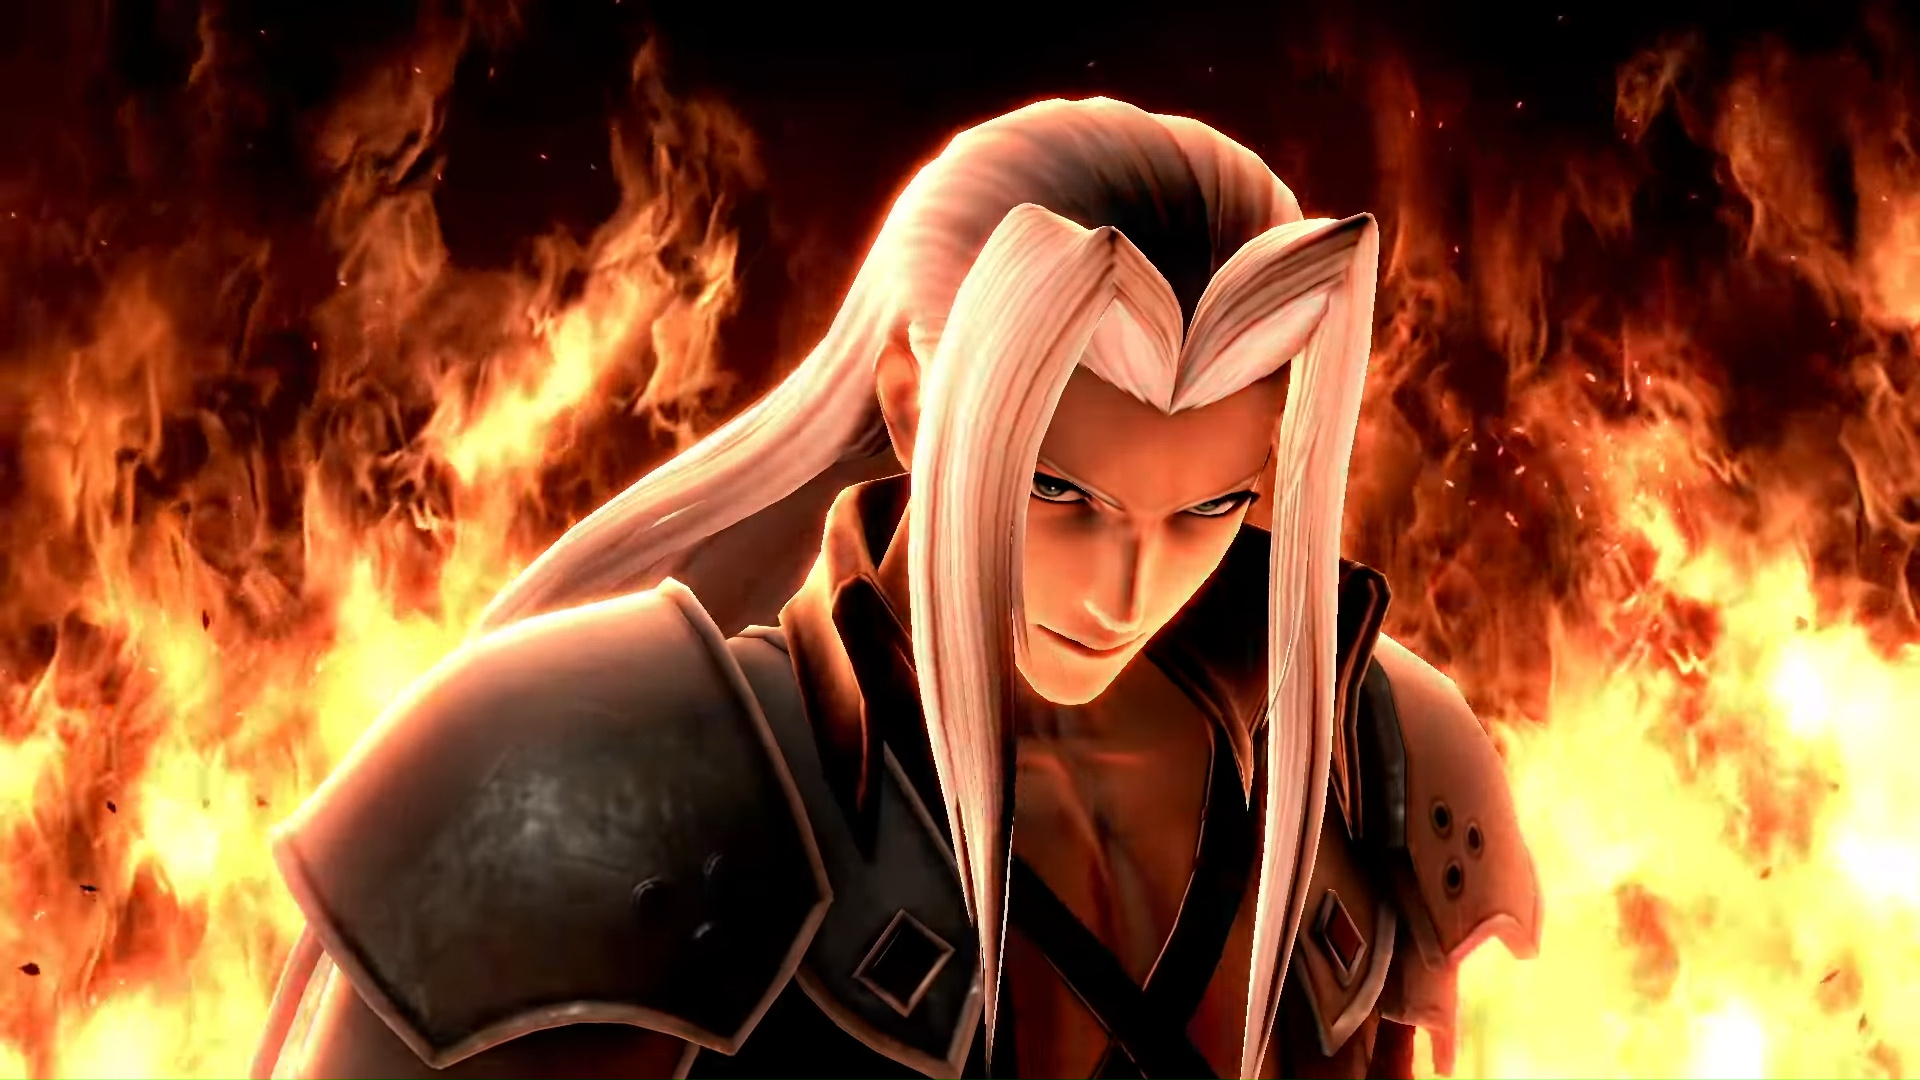 Sephiroth From Final Fantasy Vii Joins Super Smash Bros Ultimate This Month Nintendo Life